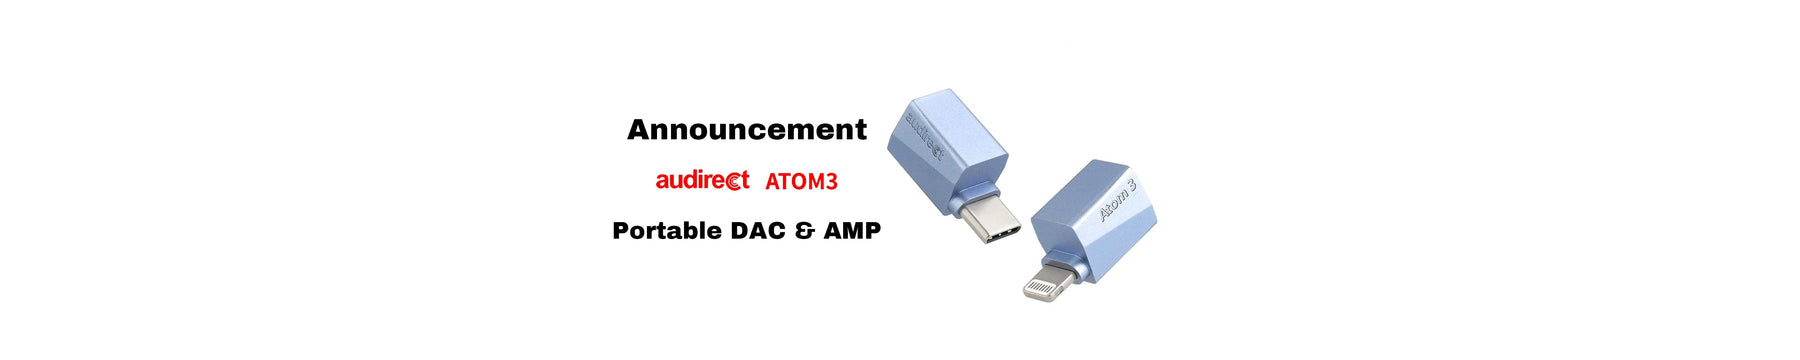 Meet The All-New Audirect Atom 3: Latest Portable USB DAC/AMP With Premium ESS Sabre DAC Chipset